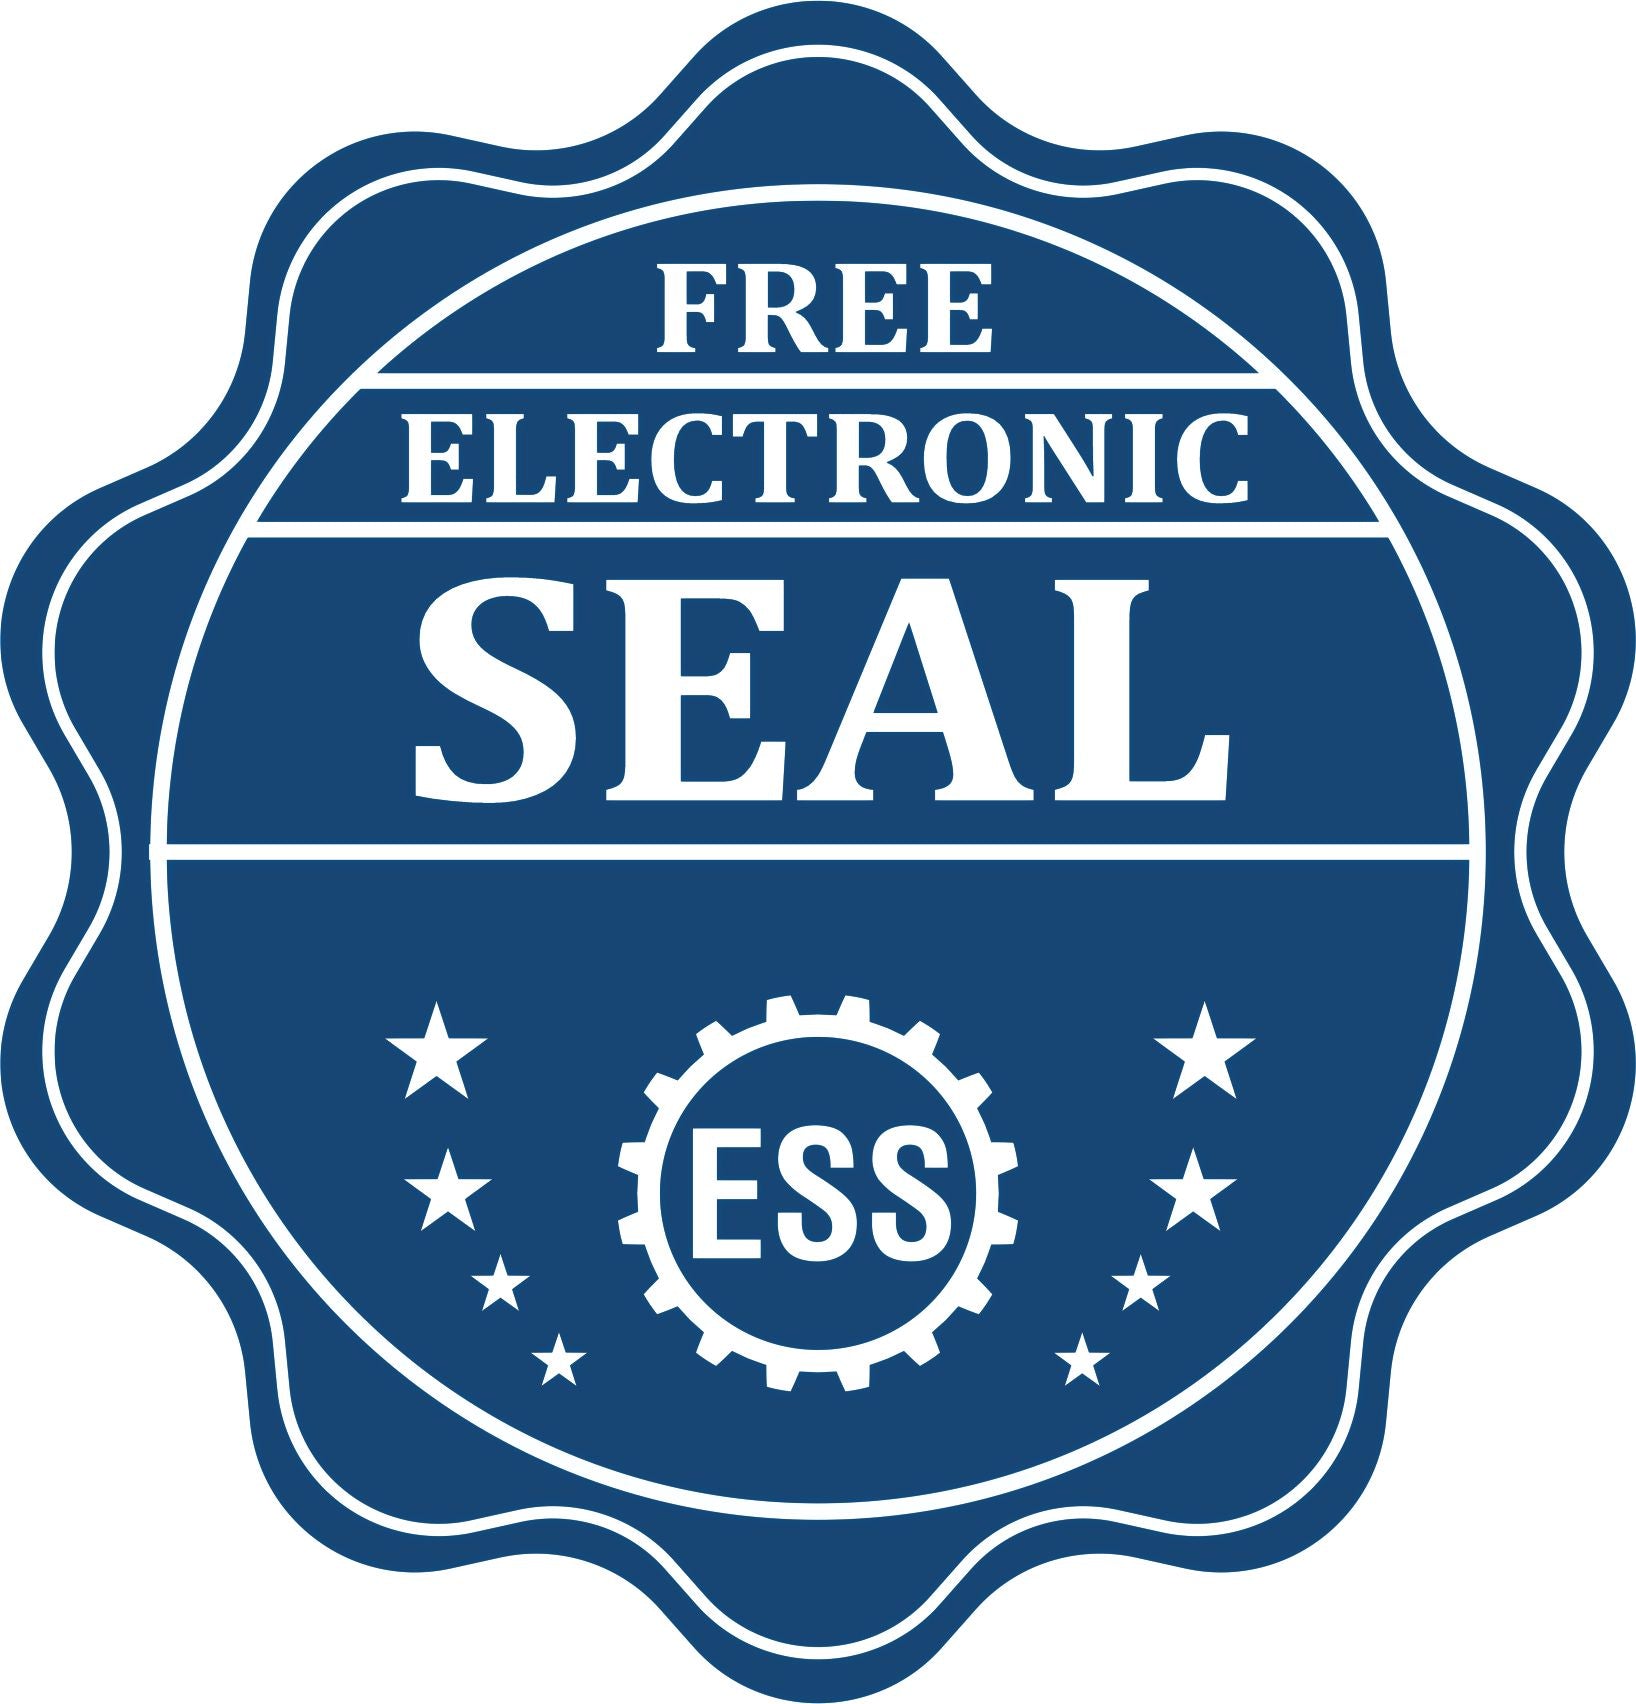 A badge showing a free electronic seal for the New York Engineer Desk Seal with stars and the ESS gear on the emblem.